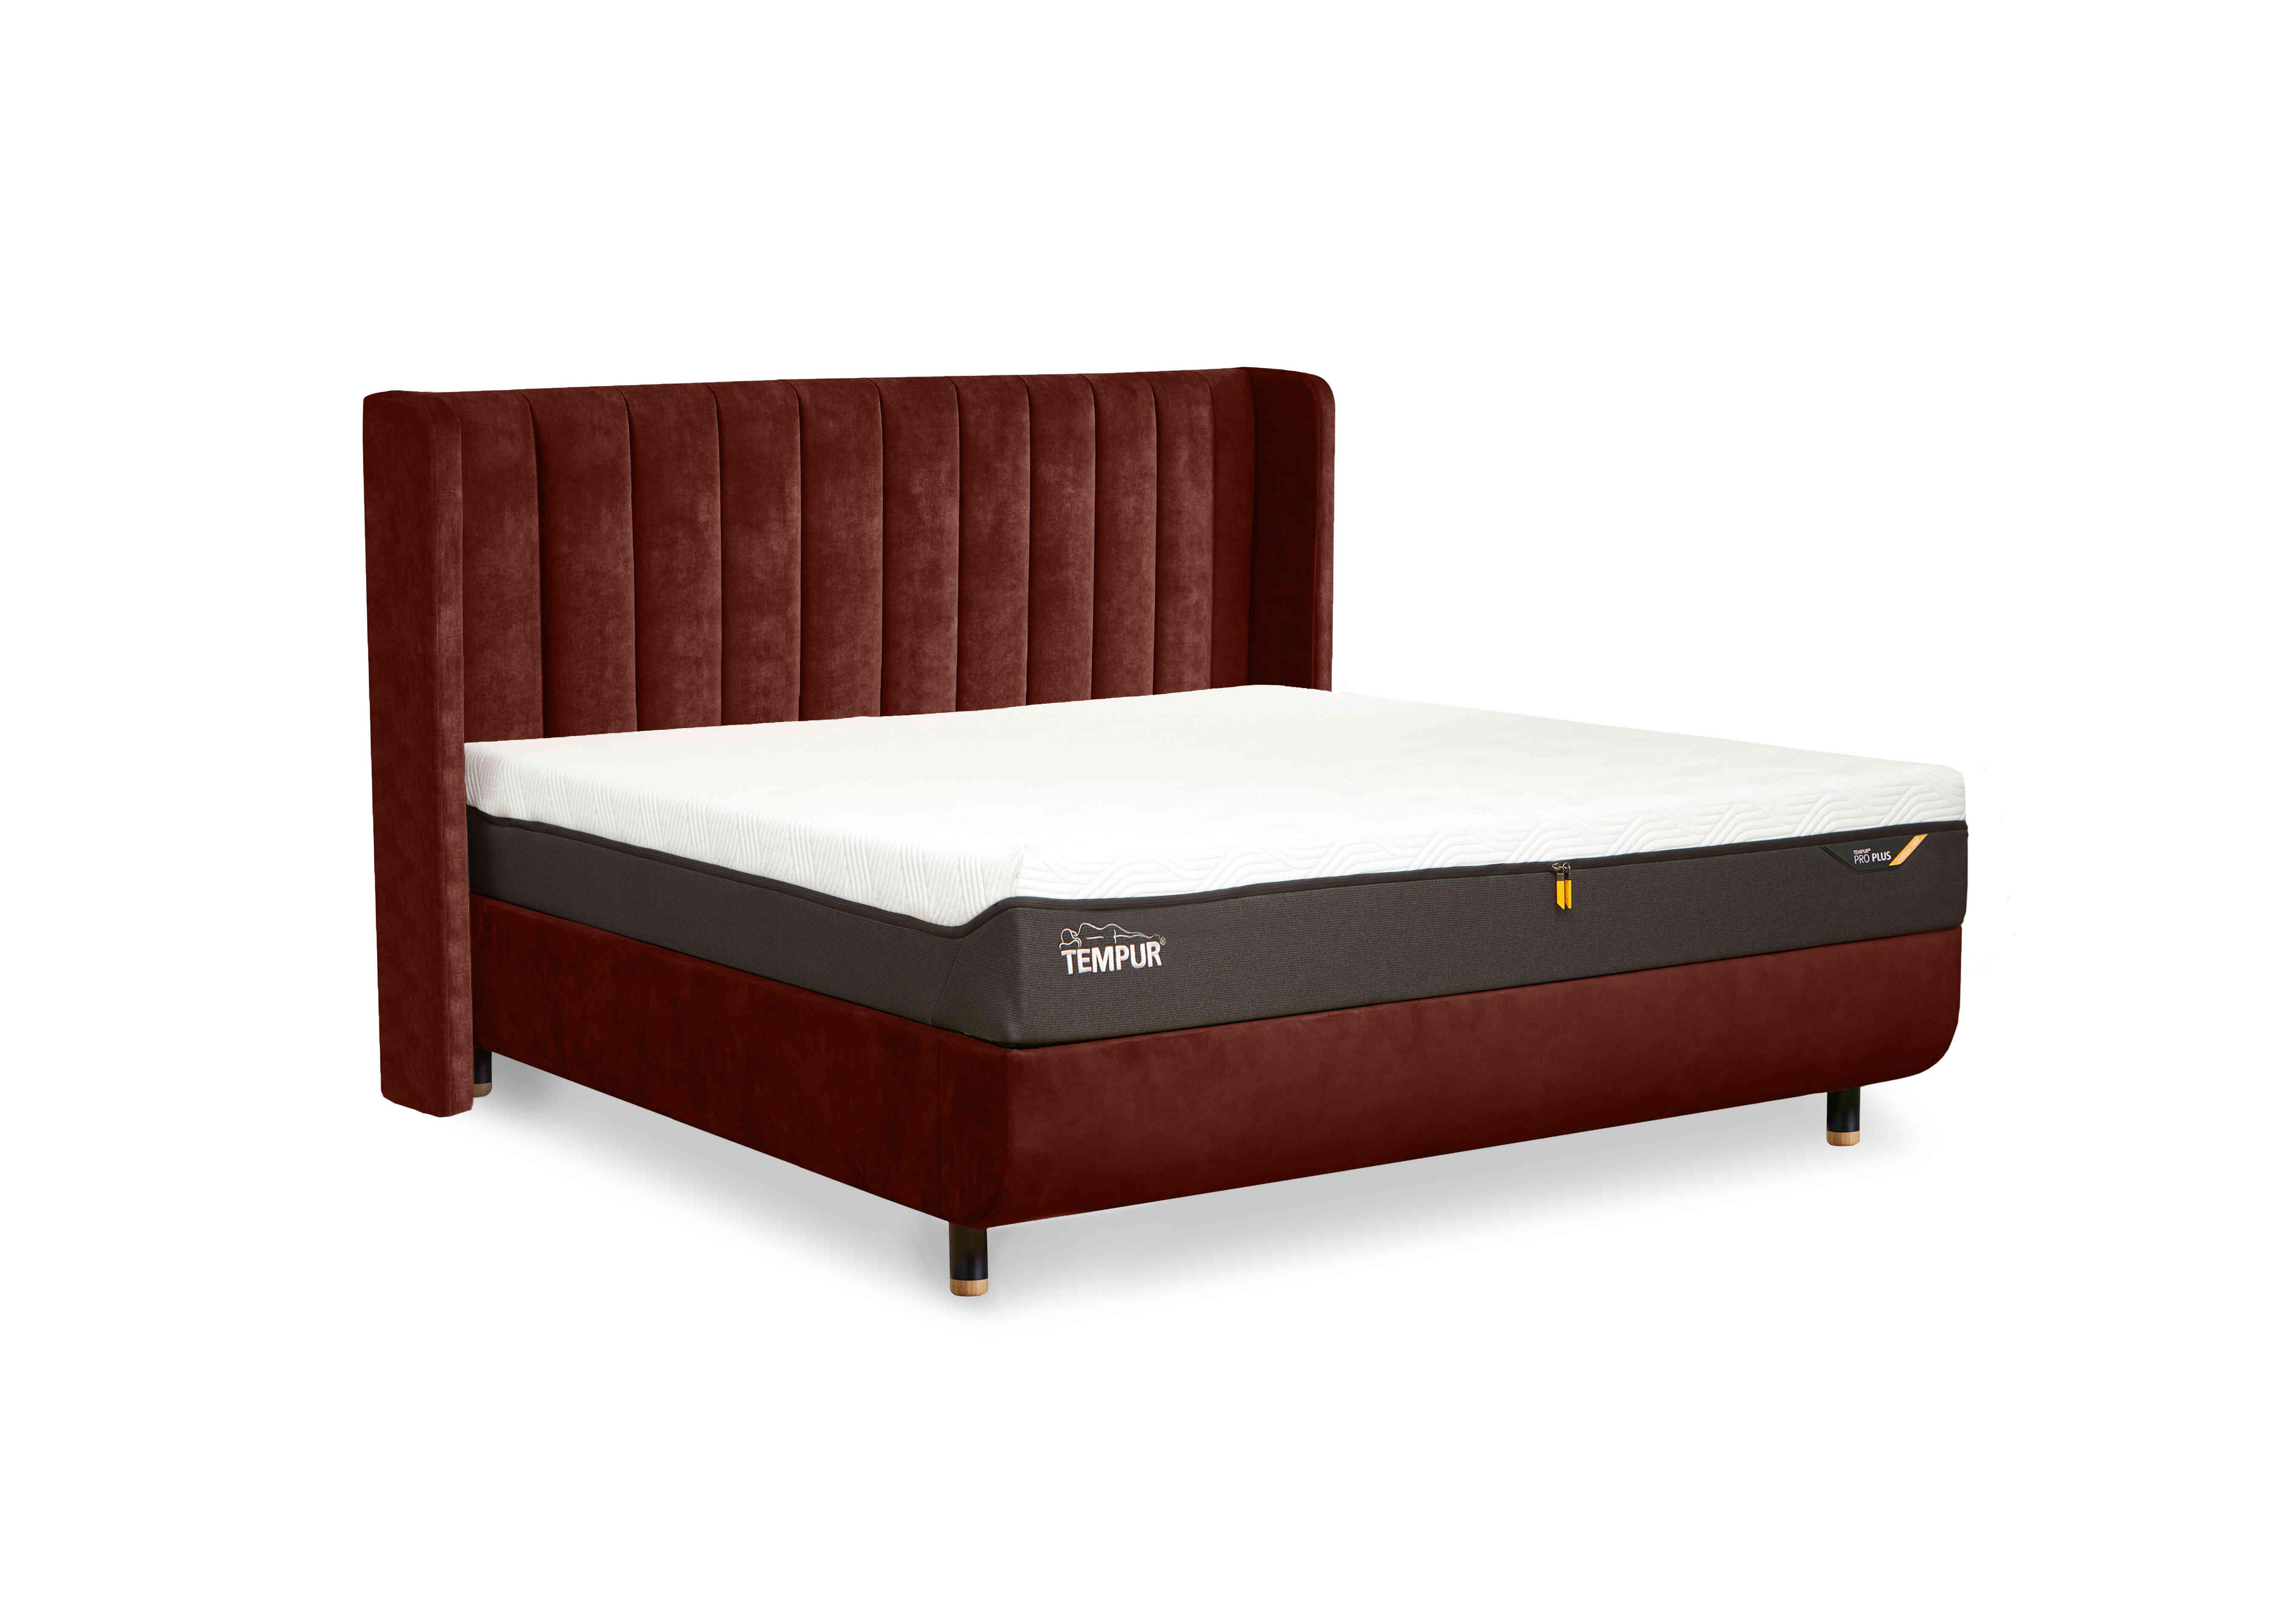 Arc Slatted Ottoman Bed Frame with Lodret Headboard in Copper-Black/Gold Feet on Furniture Village